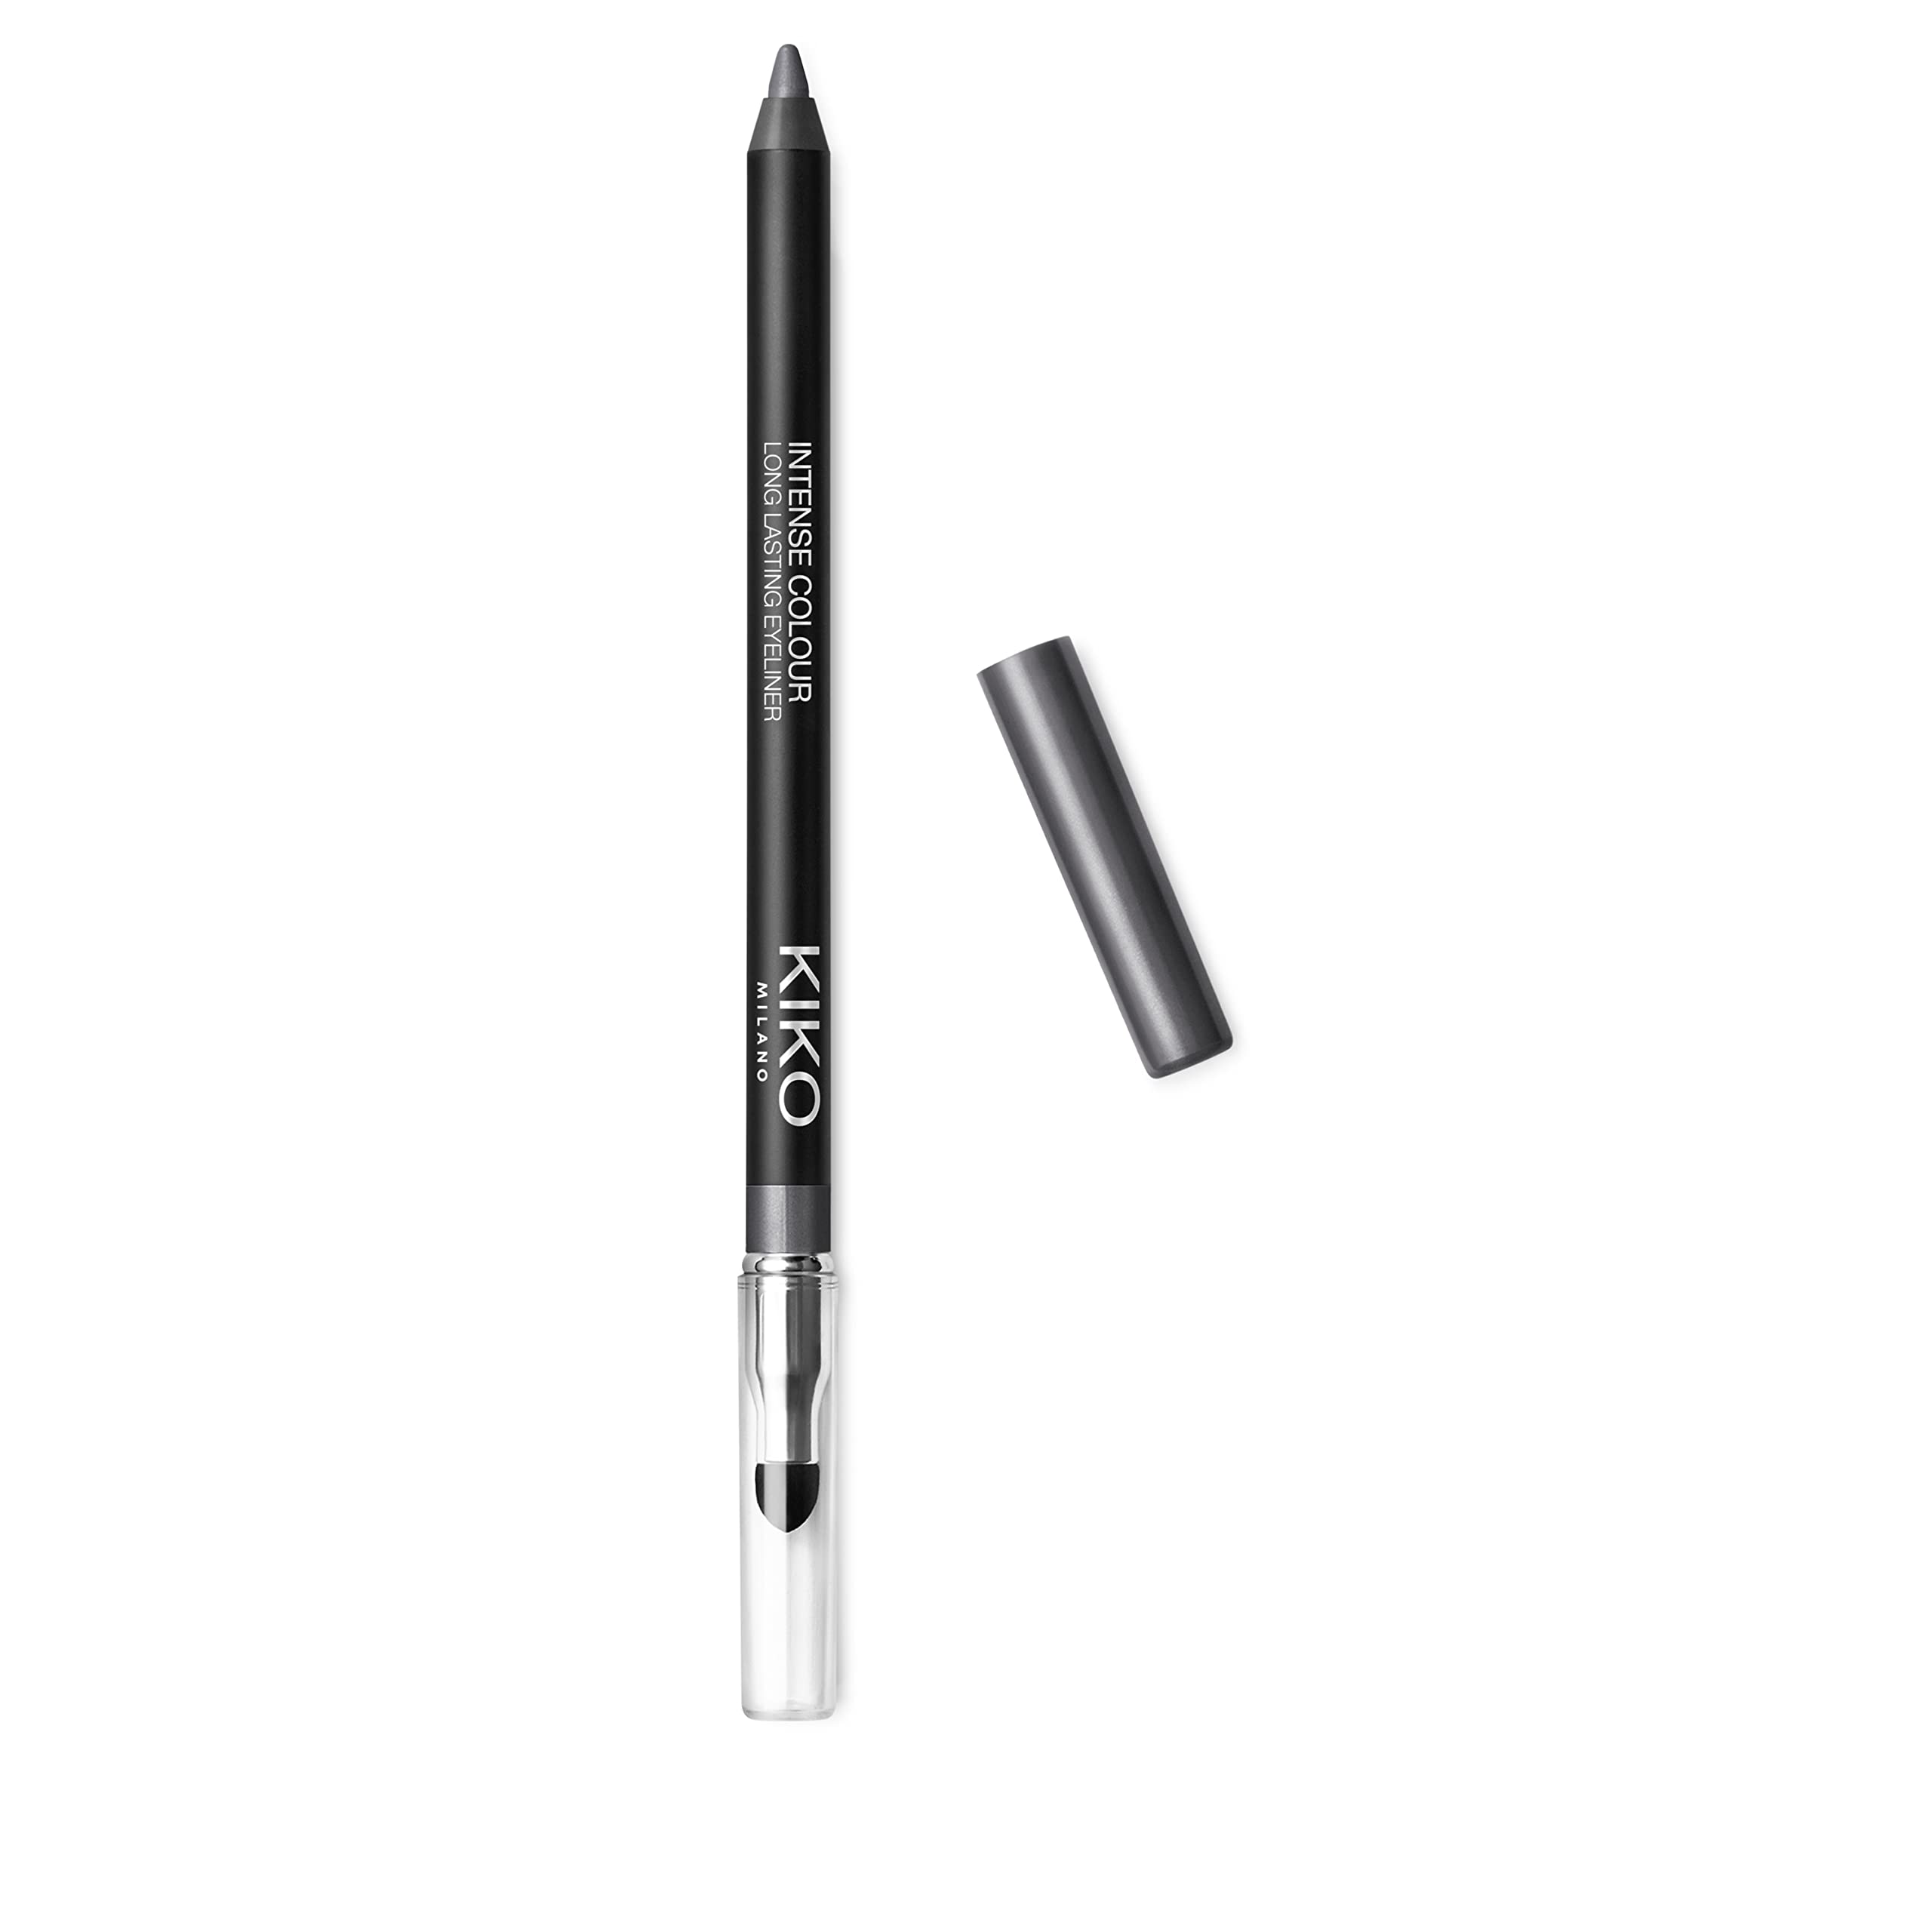 Kiko Milano Intense colour Long Lasting Eyeliner 20  Intense And Smooth-gliding Outer Eye Pencil With Long Wear